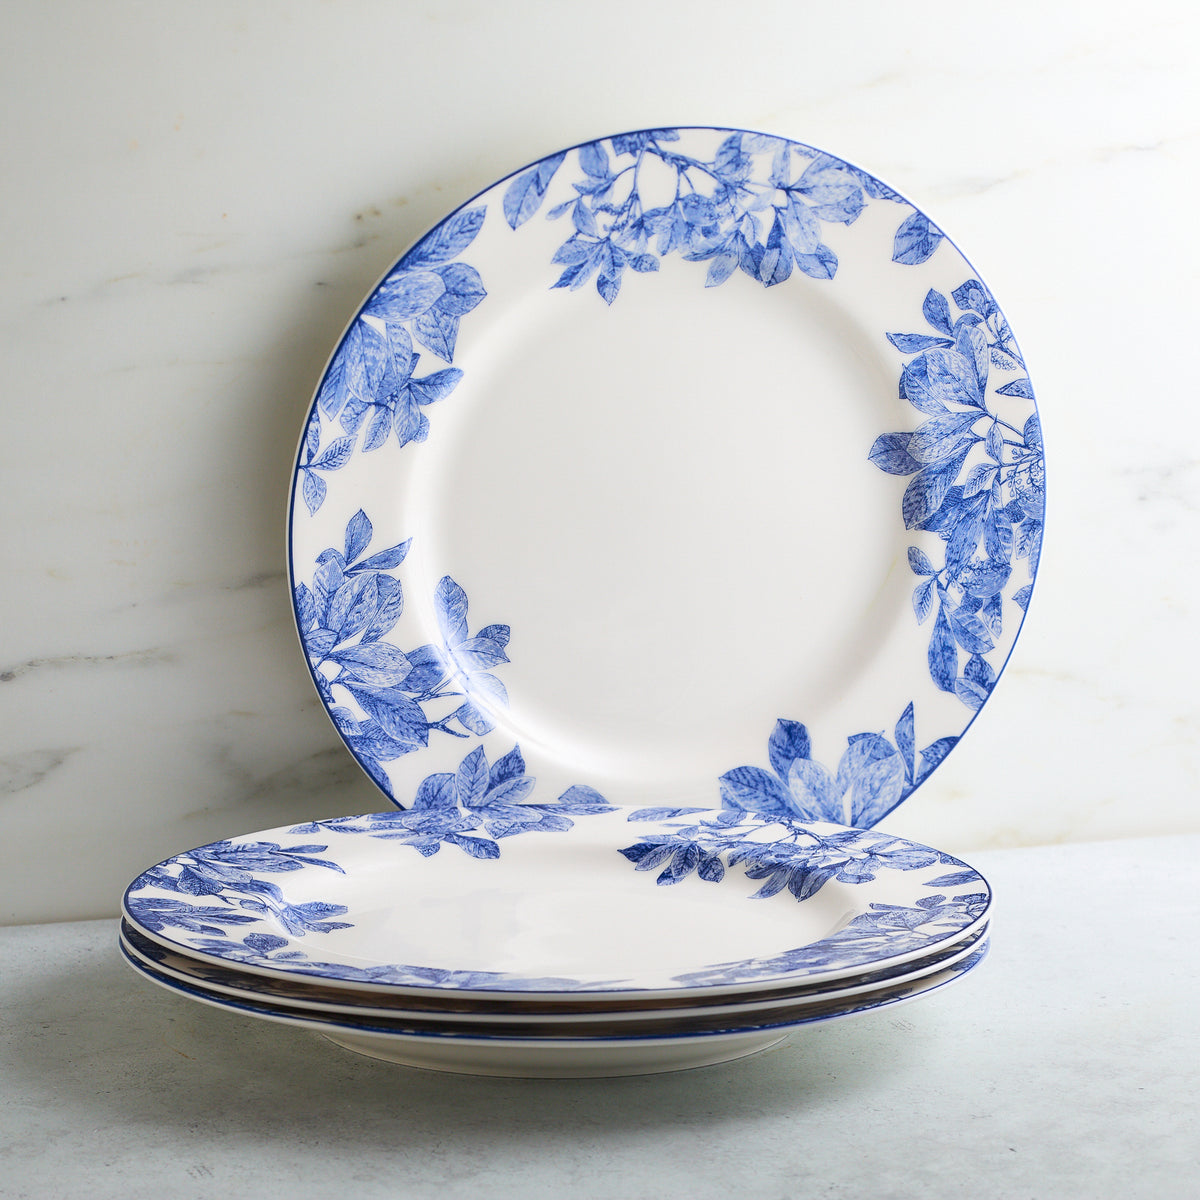 Two stacked Arbor Blue Rimmed Dinner plates with blue floral patterns on the rim, set against a marble background by Caskata Artisanal Home.